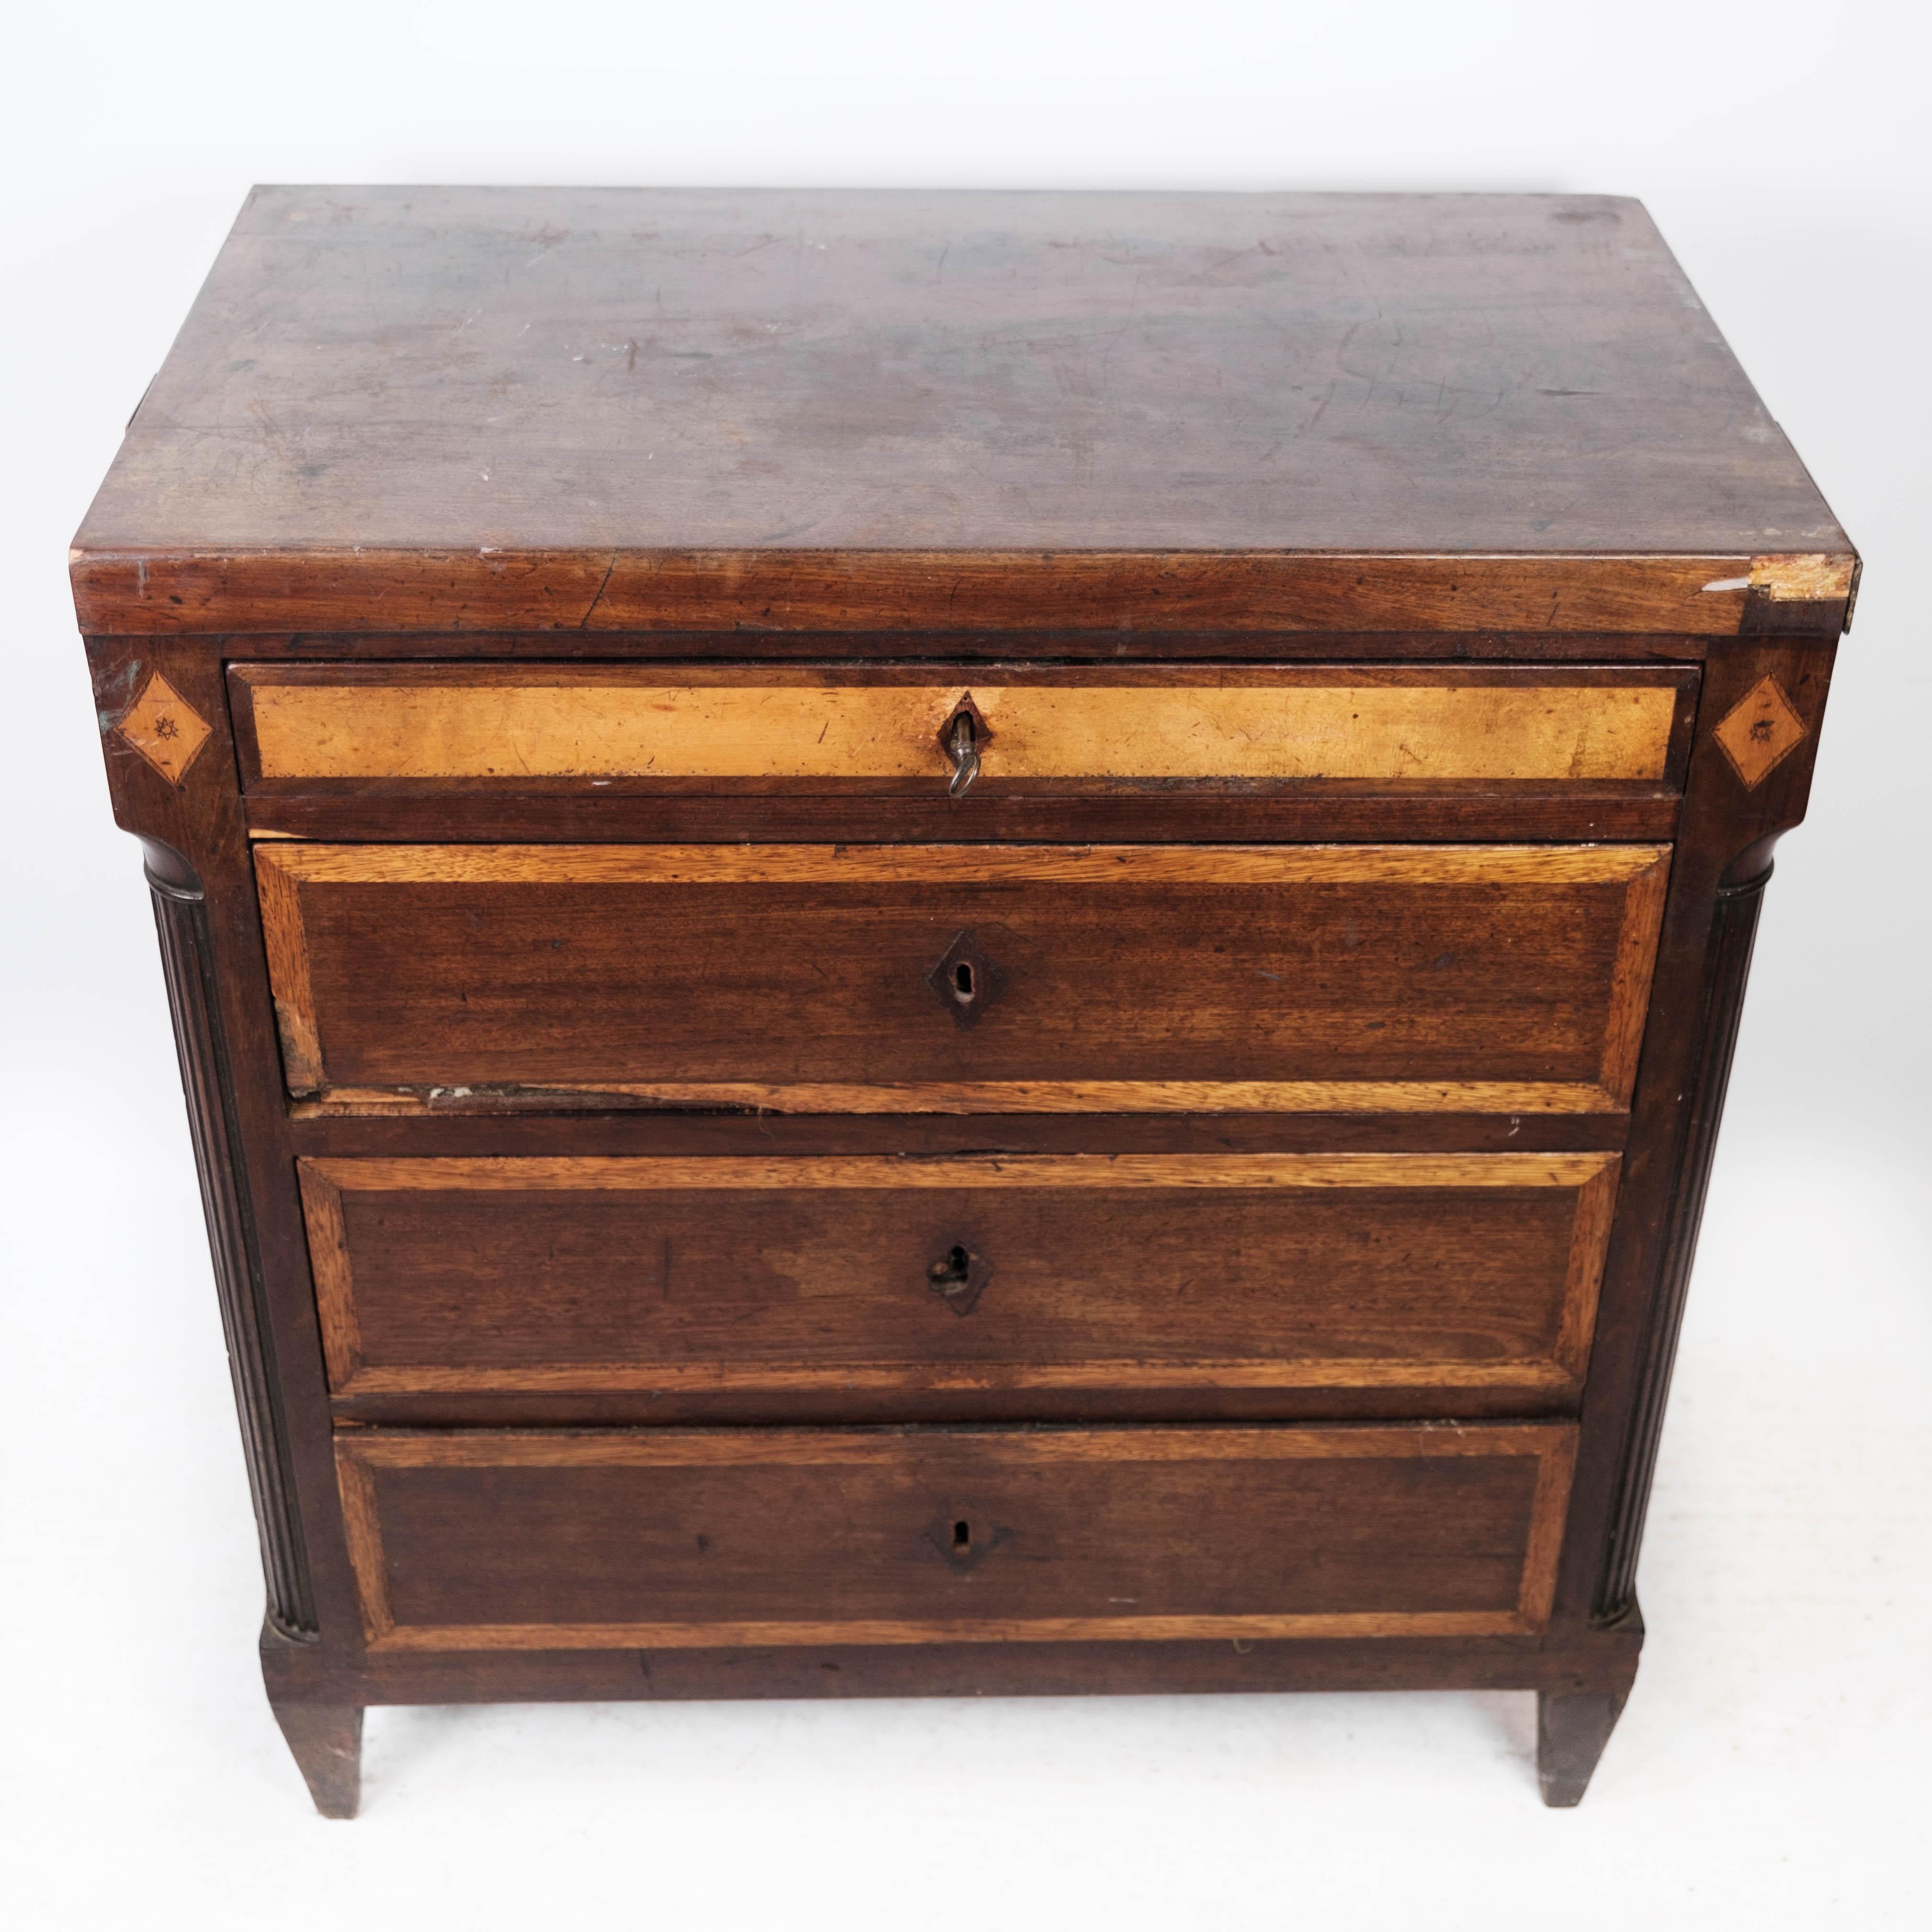 The Louis Seize chest of drawers, crafted from mahogany and adorned with exquisite inlaid wood detailing, is a remarkable antique piece from the 1790s. This elegant chest showcases the opulence and sophistication of the Louis Seize (Louis XVI)